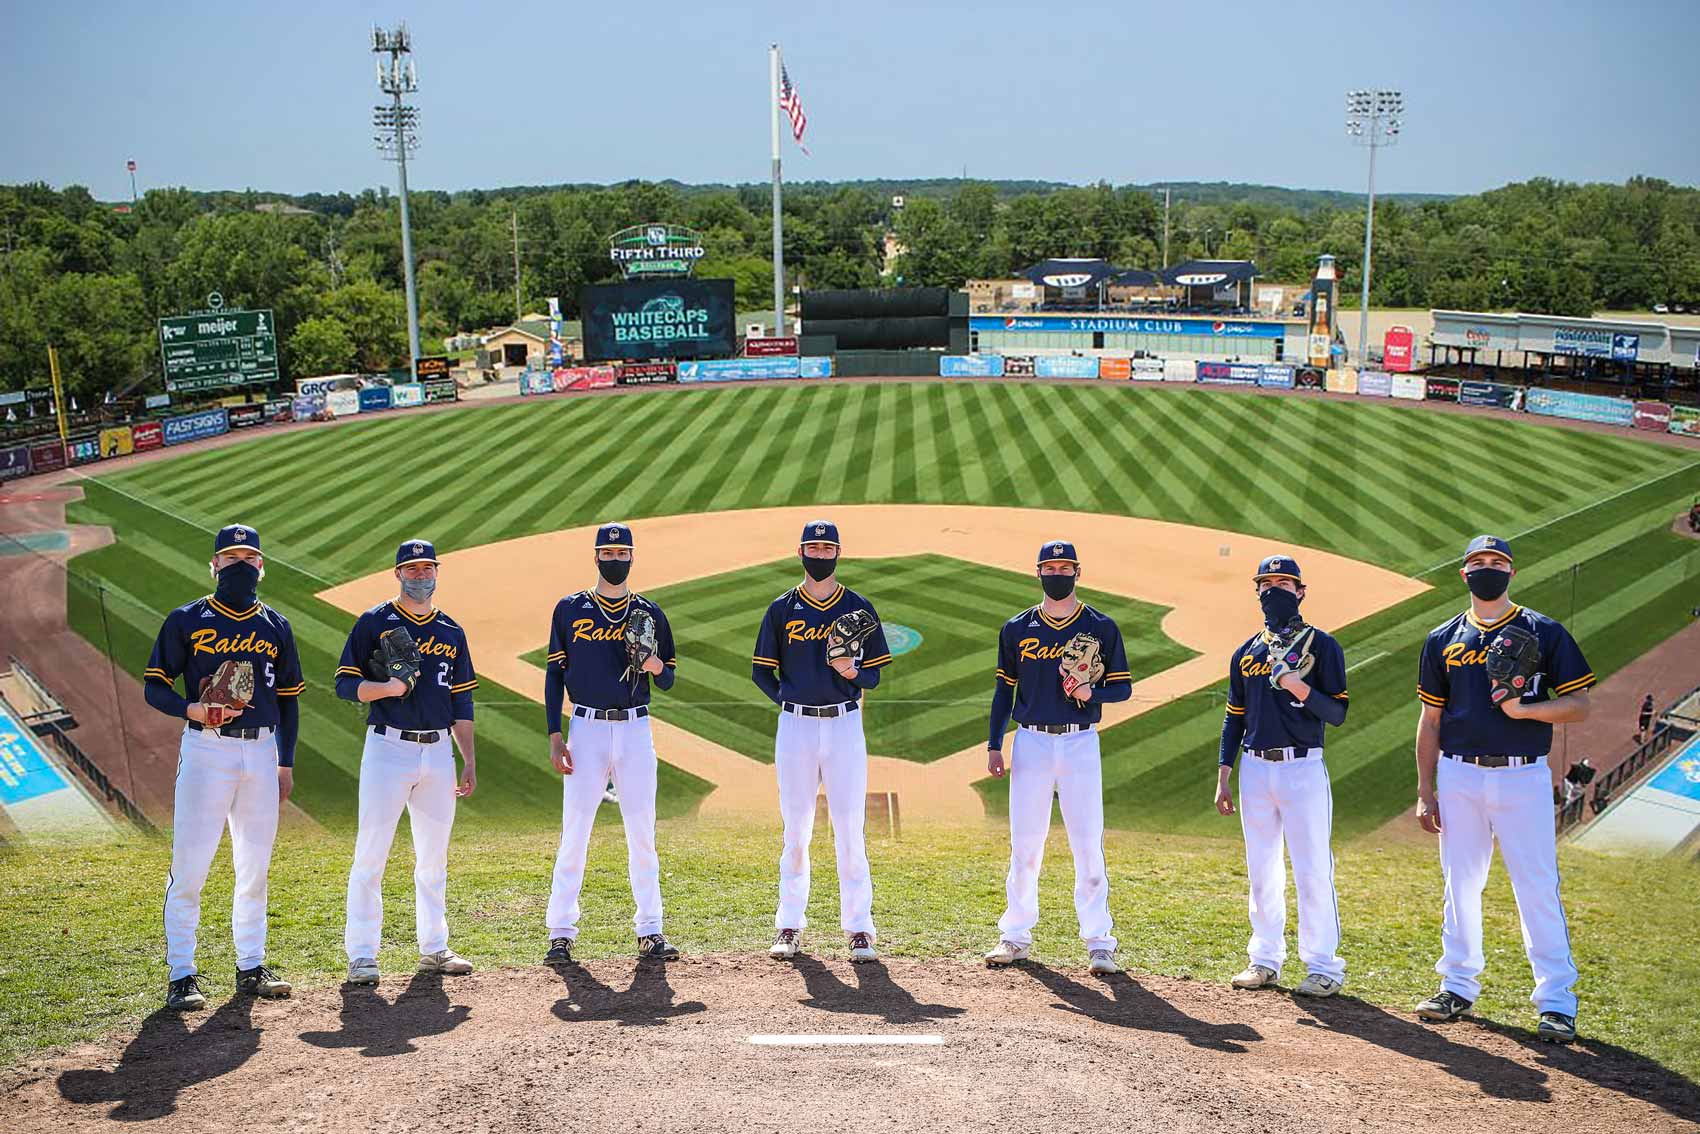 Get in the game with GRCC and the West Michigan Whitecaps